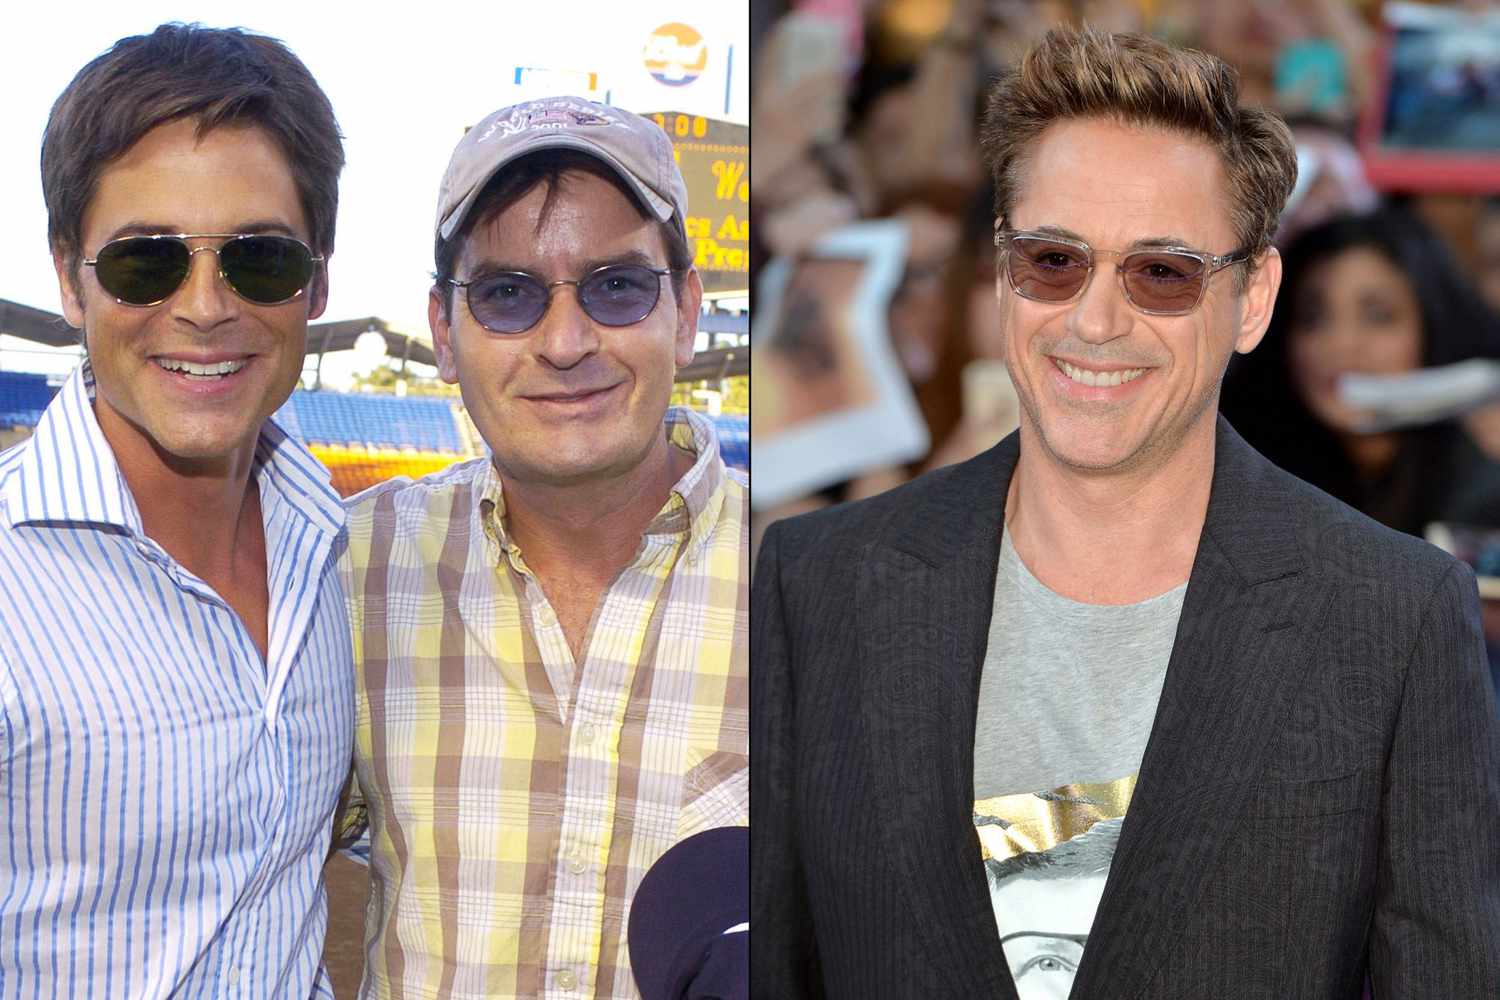 Rob Lowe, Charlie Sheen, and Robert Downey Jr.